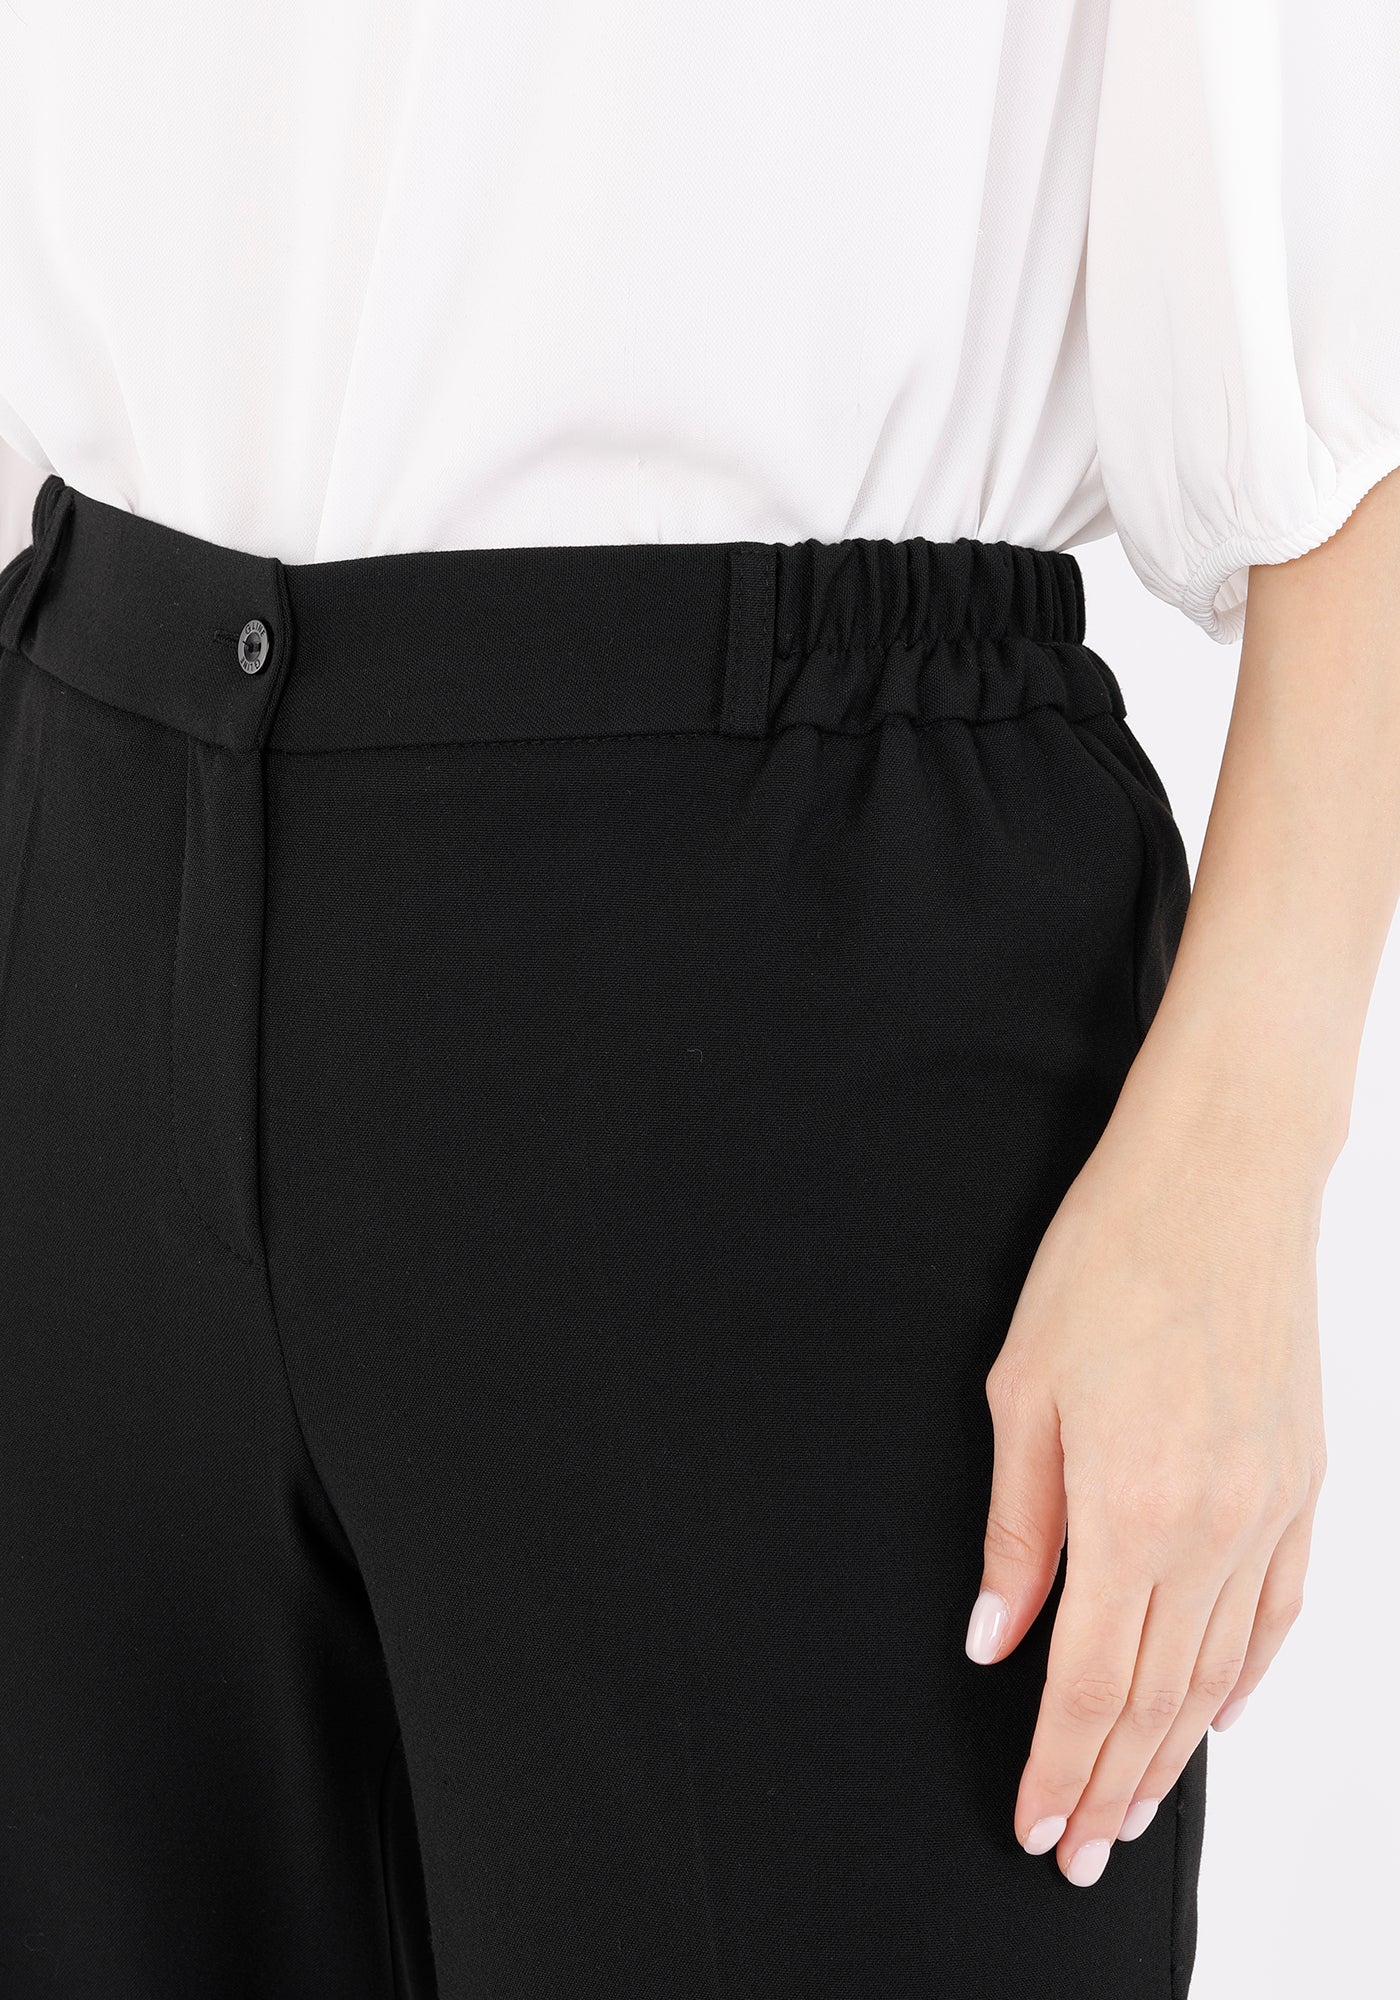 Straight Black Pants for Women with Elastic Waistband and Zipper Combined G-Line